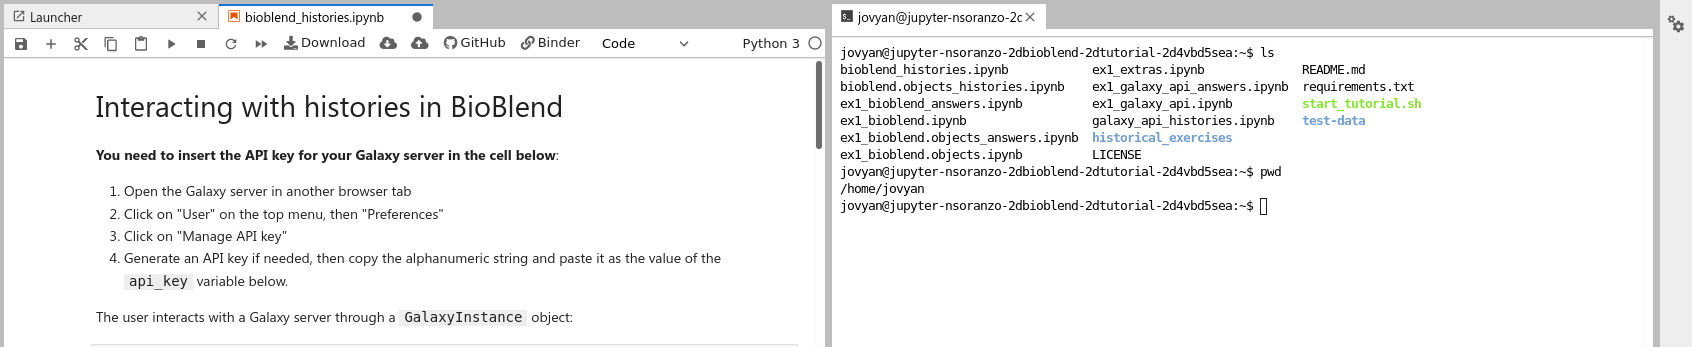 screenshot of jupyterlab with notebook and terminal side-by-side.